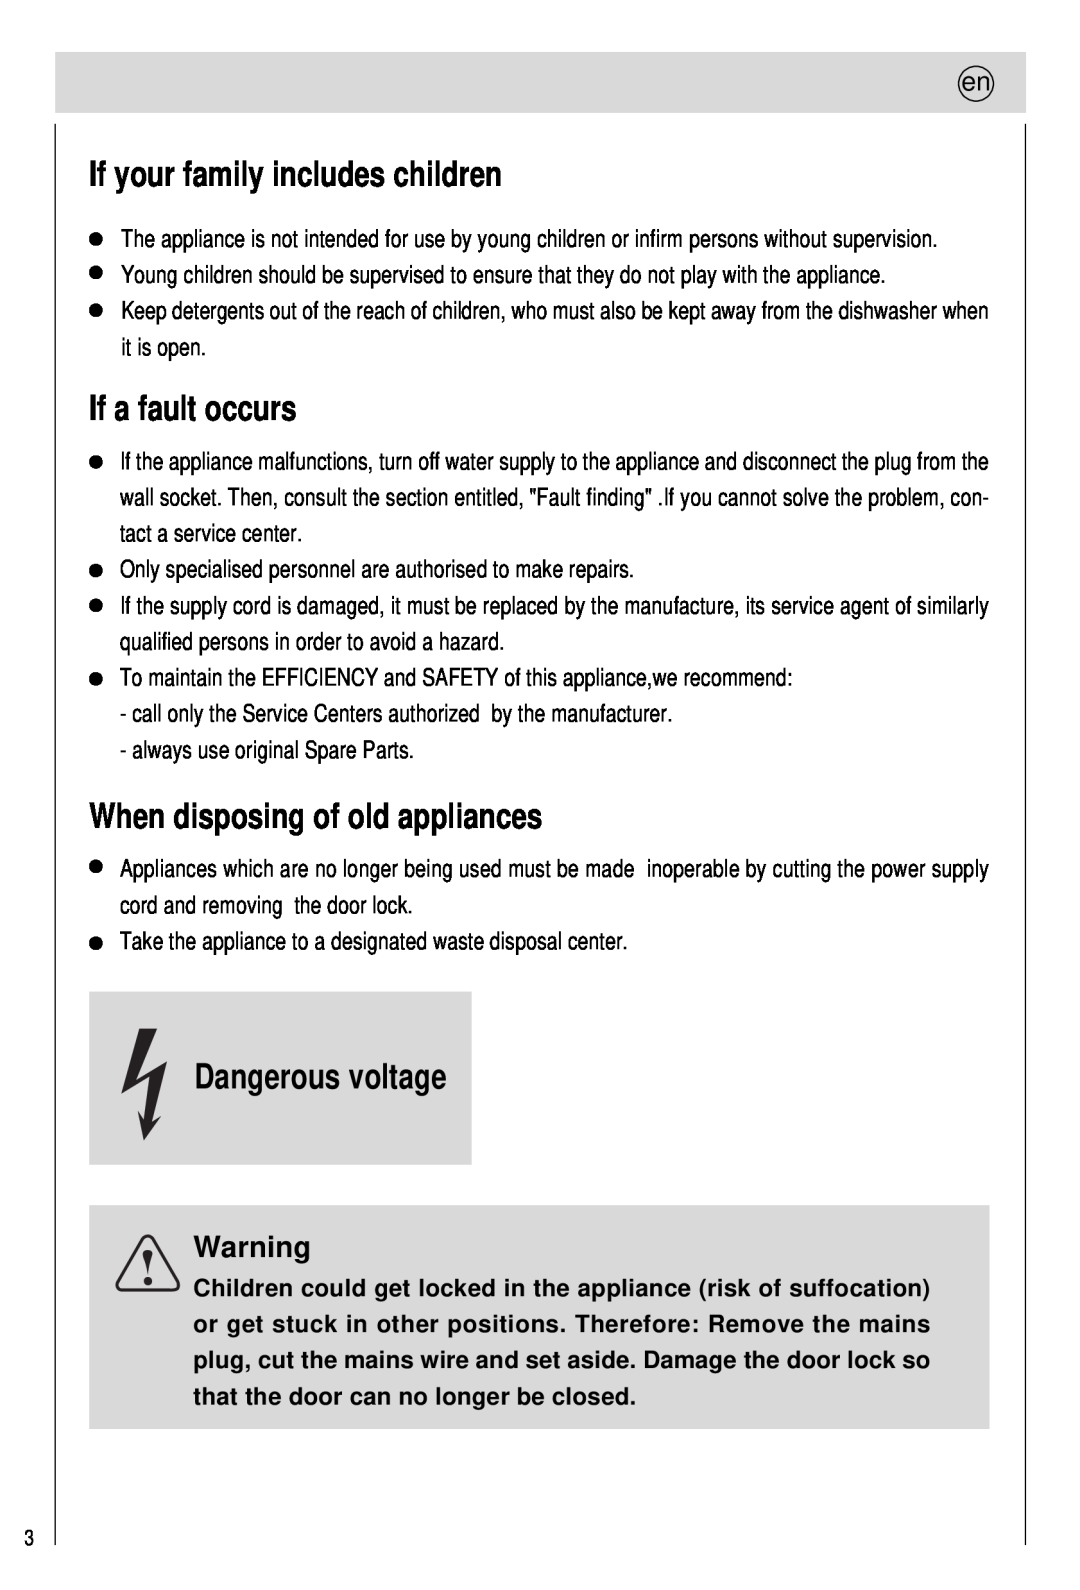 Haier 0120505609 If your family includes children, If a fault occurs, When disposing of old appliances, Dangerous voltage 